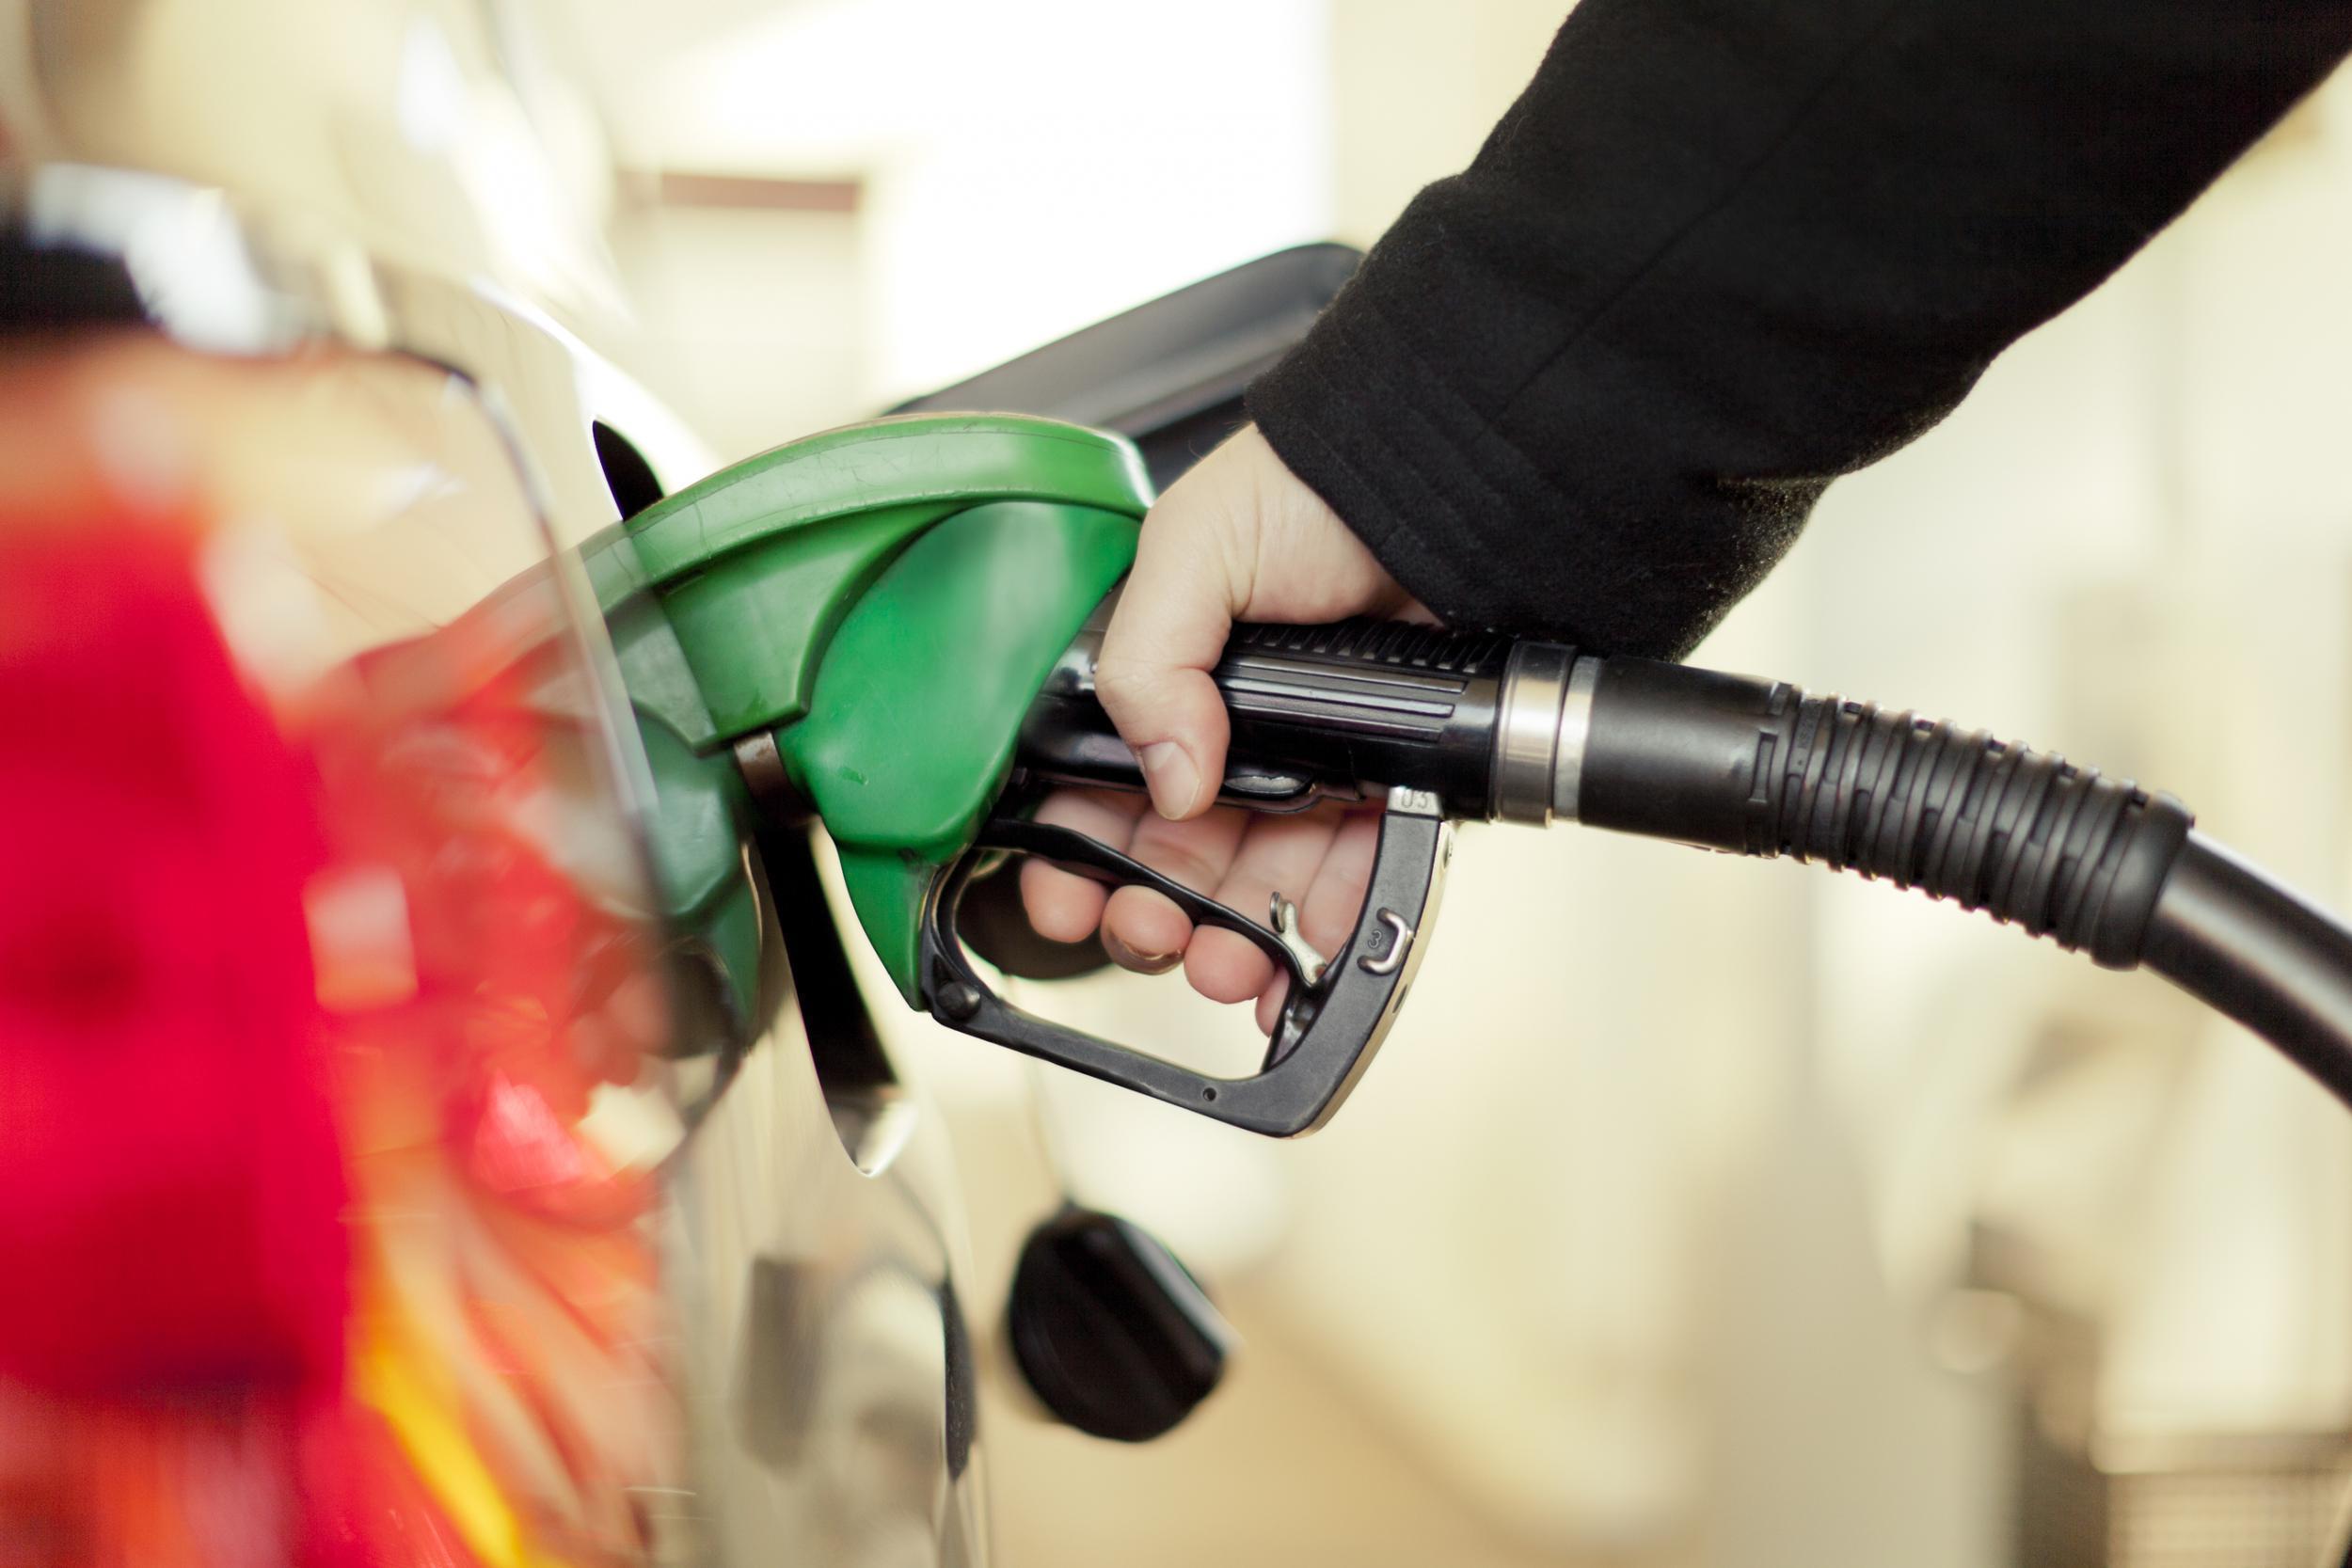 The RAC said it was hard to see pump prices getting much cheaper in the early part of this year